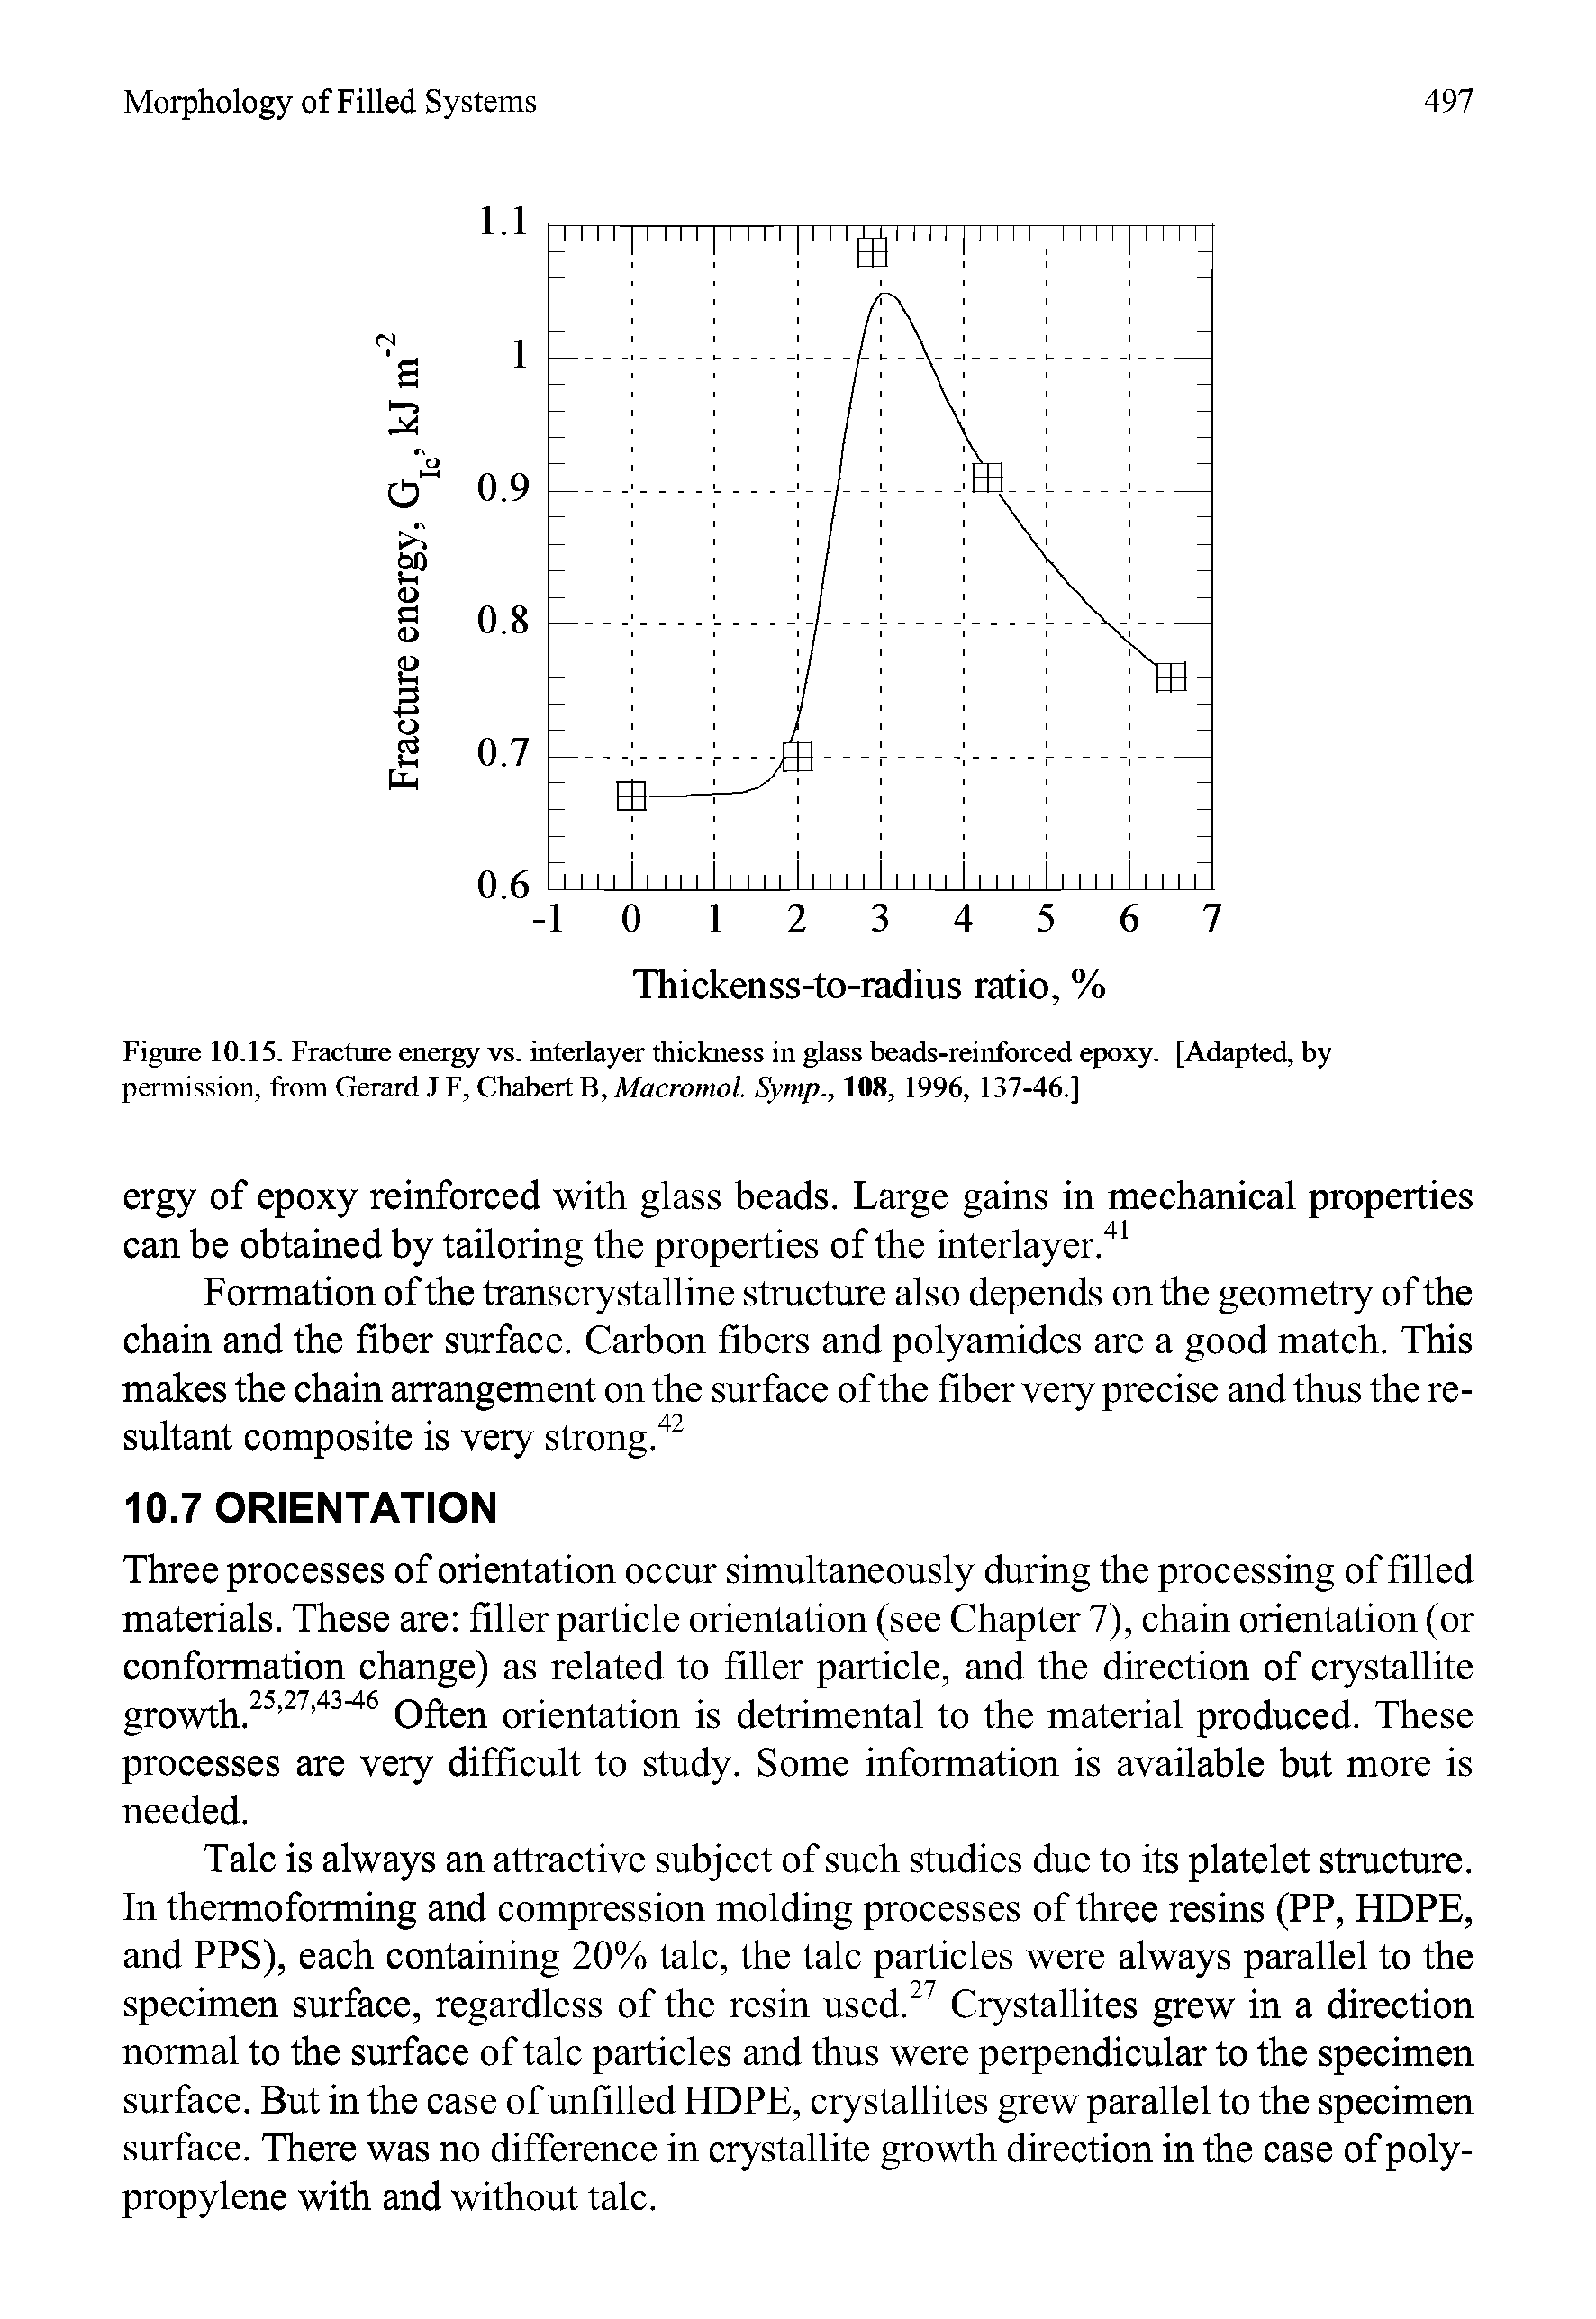 Figure 10.15. Fracture energy vs. interlayer thickness in glass beads-reinforced epoxy. [Adapted, by permission, from Gerard J F, Chabert B, Macromol. Symp., 108, 1996, 137-46.]...